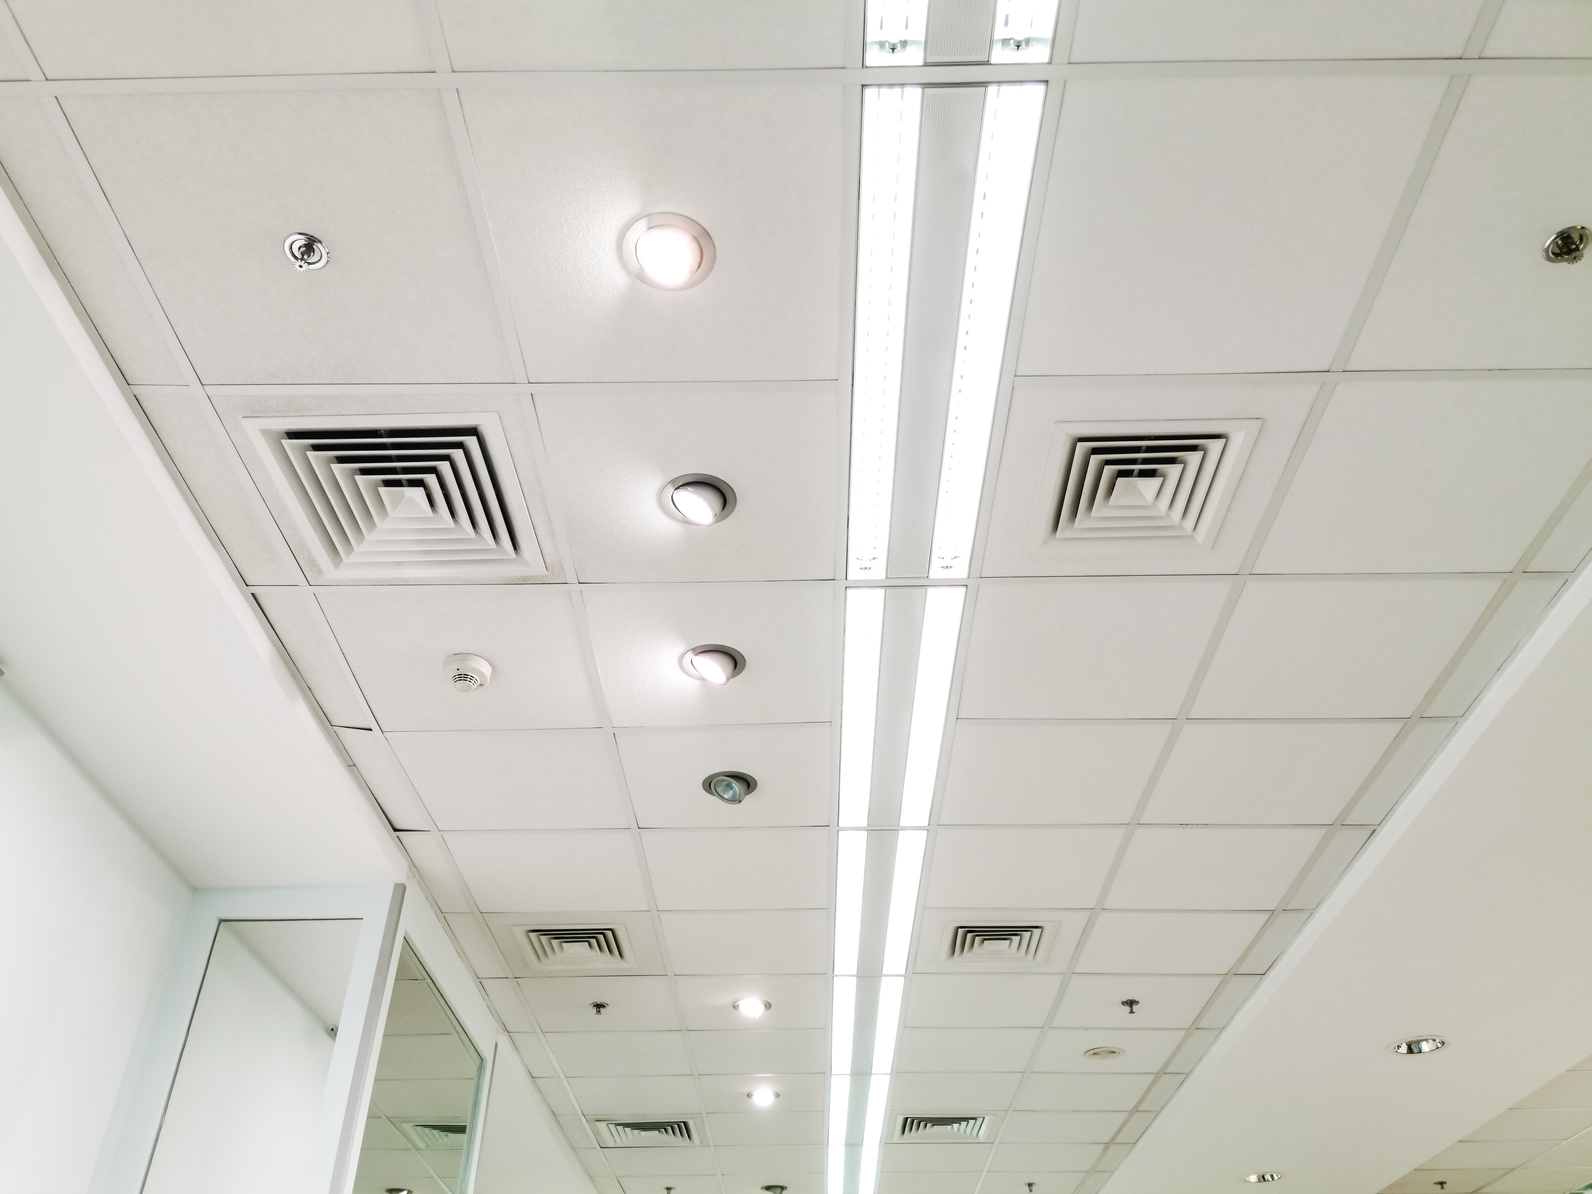 Ceiling Tiles Good For Soundproofing, How To Cut Ceiling Tiles Around Pipes